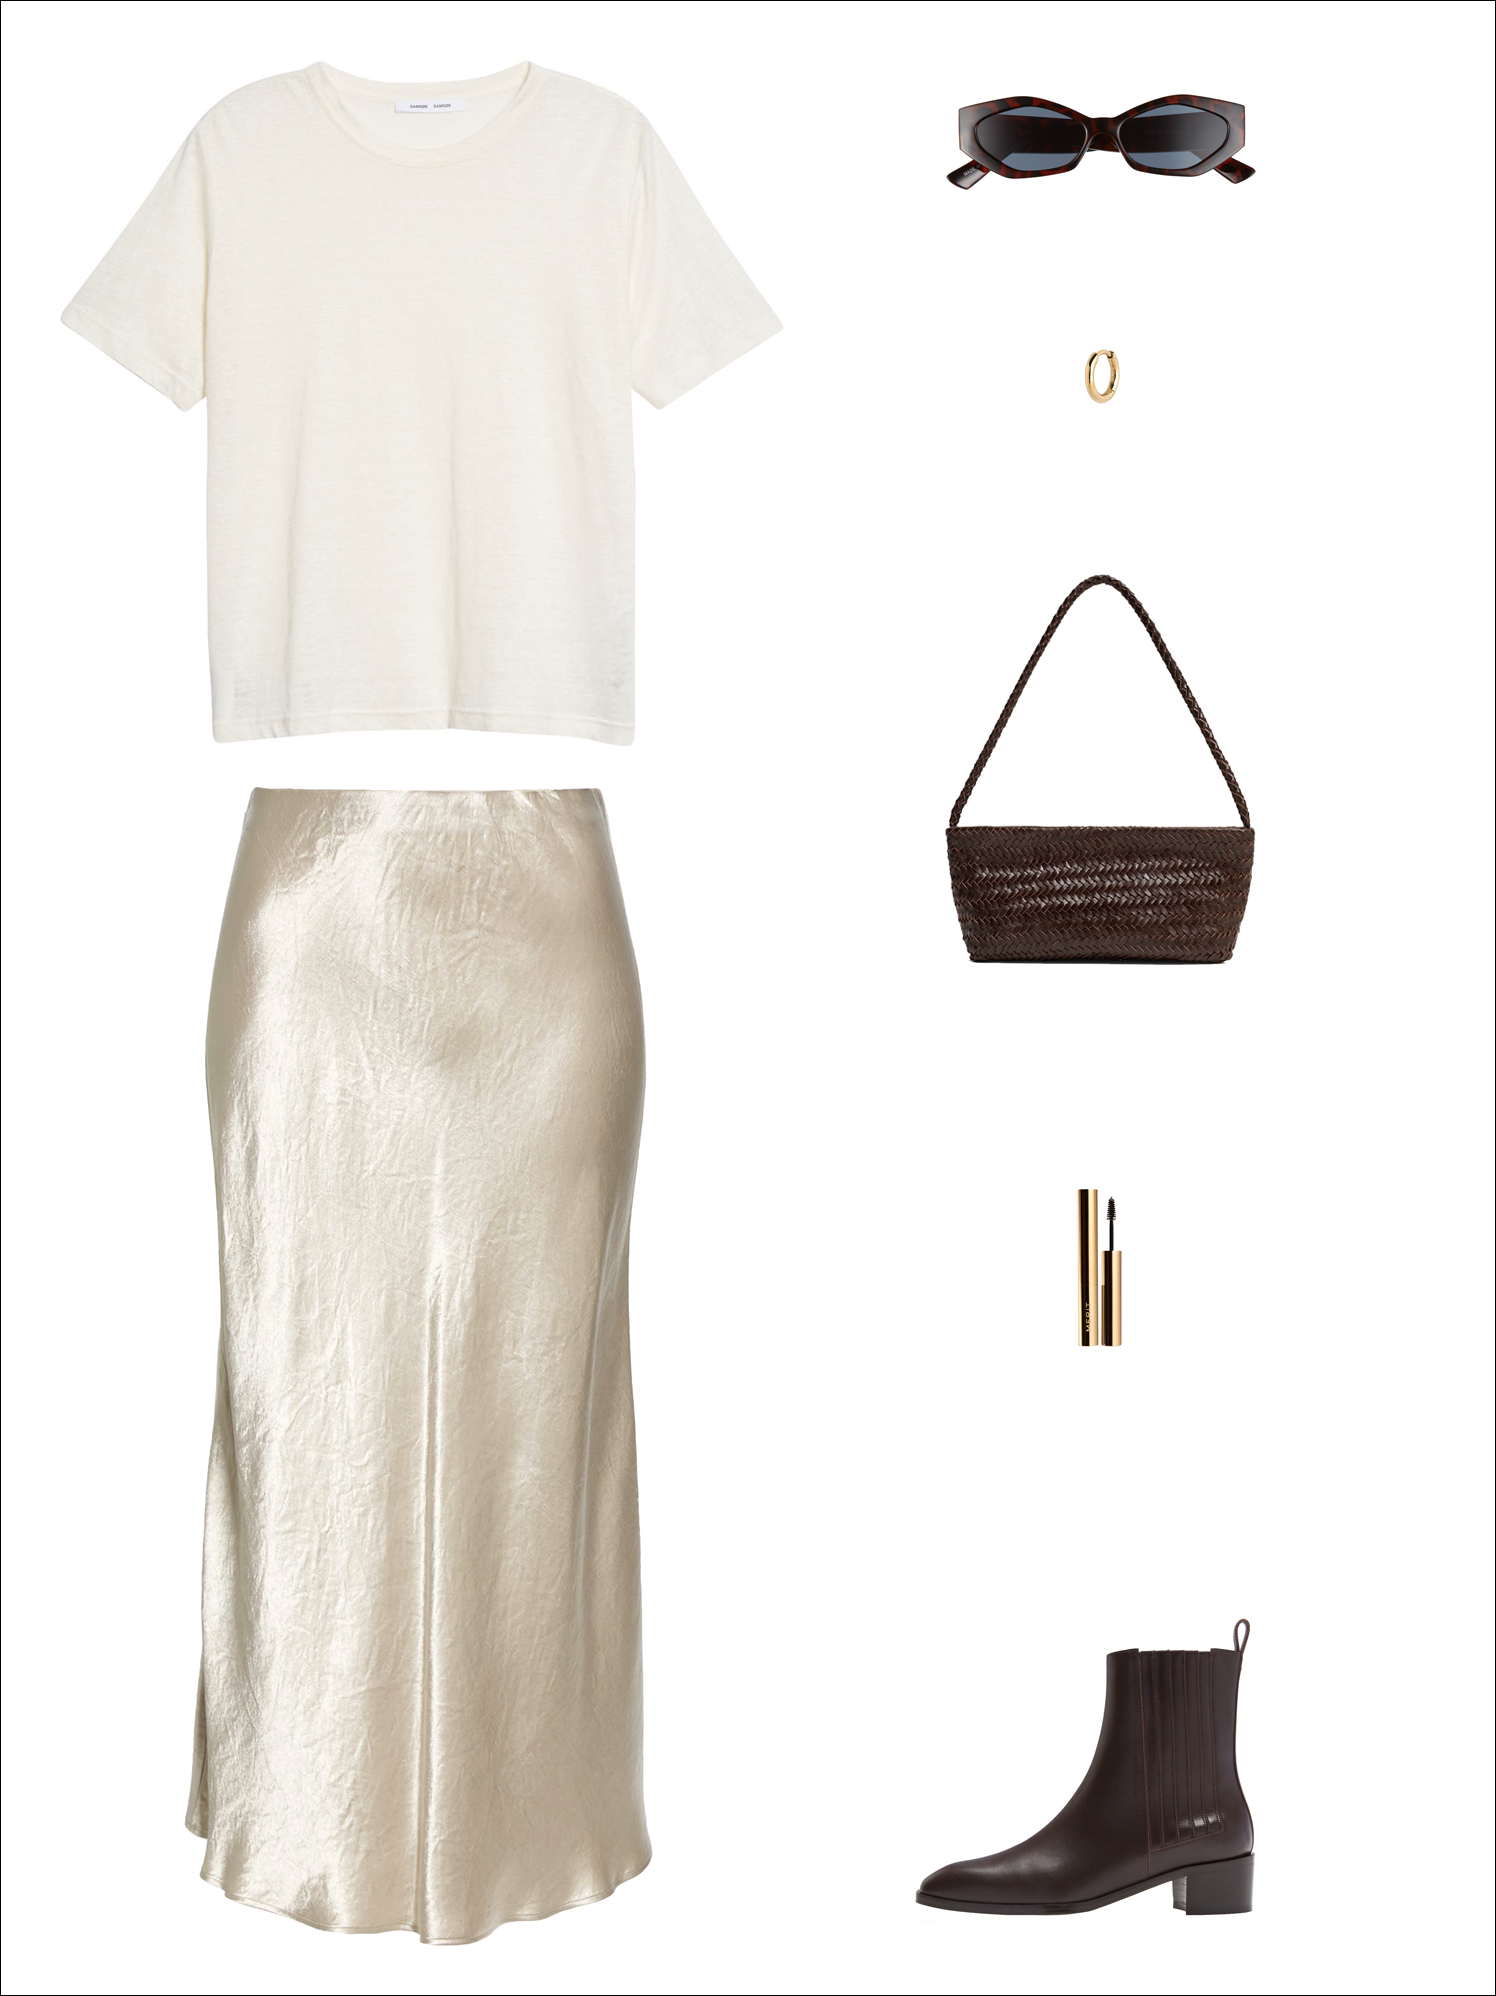 Transitional spring outfit idea with a white linen t-shirt, standout sunglasses, a cool hoop earring, braided bag, satin midi skirt, and brown Chelsea ankle boots